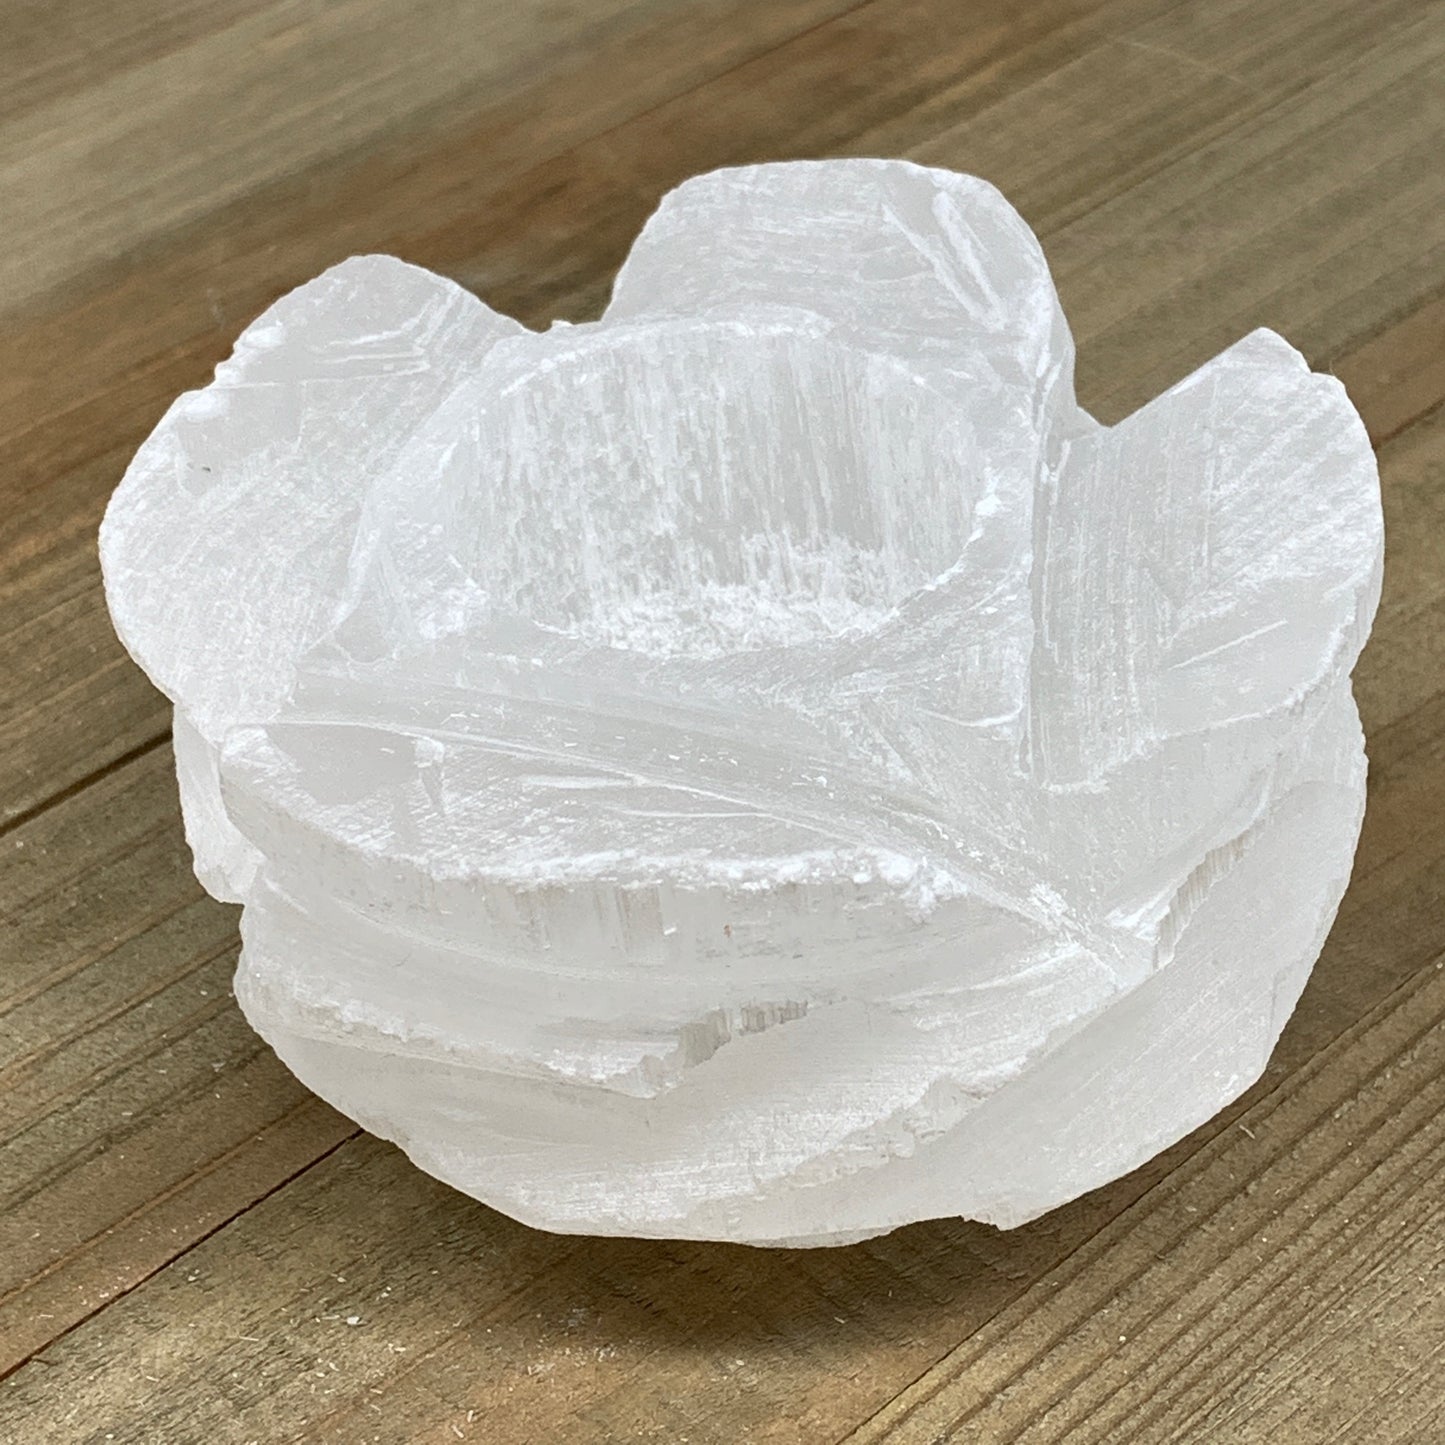 1pc,460-520g, 3.6"x2.1" White Selenite Candle Holder Round Shape from Morocco